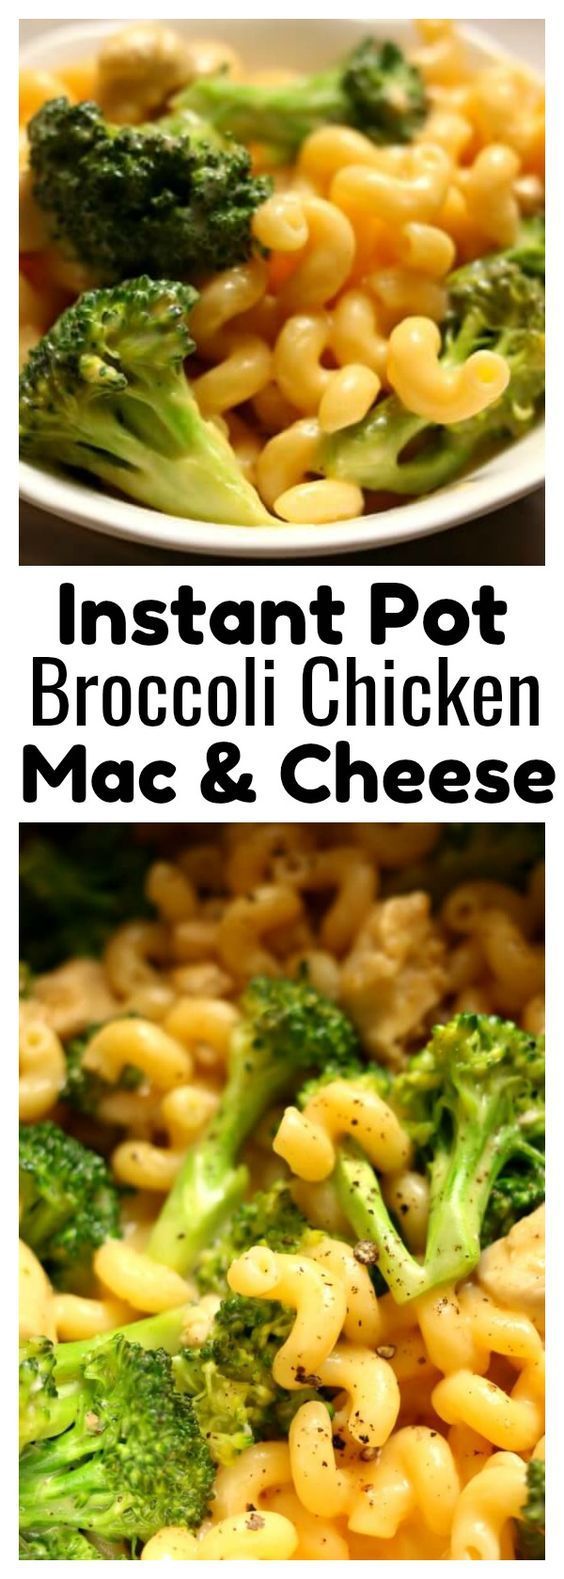 INSTANT POT BROCCOLI CHICKEN MAC AND CHEESE RECIPES